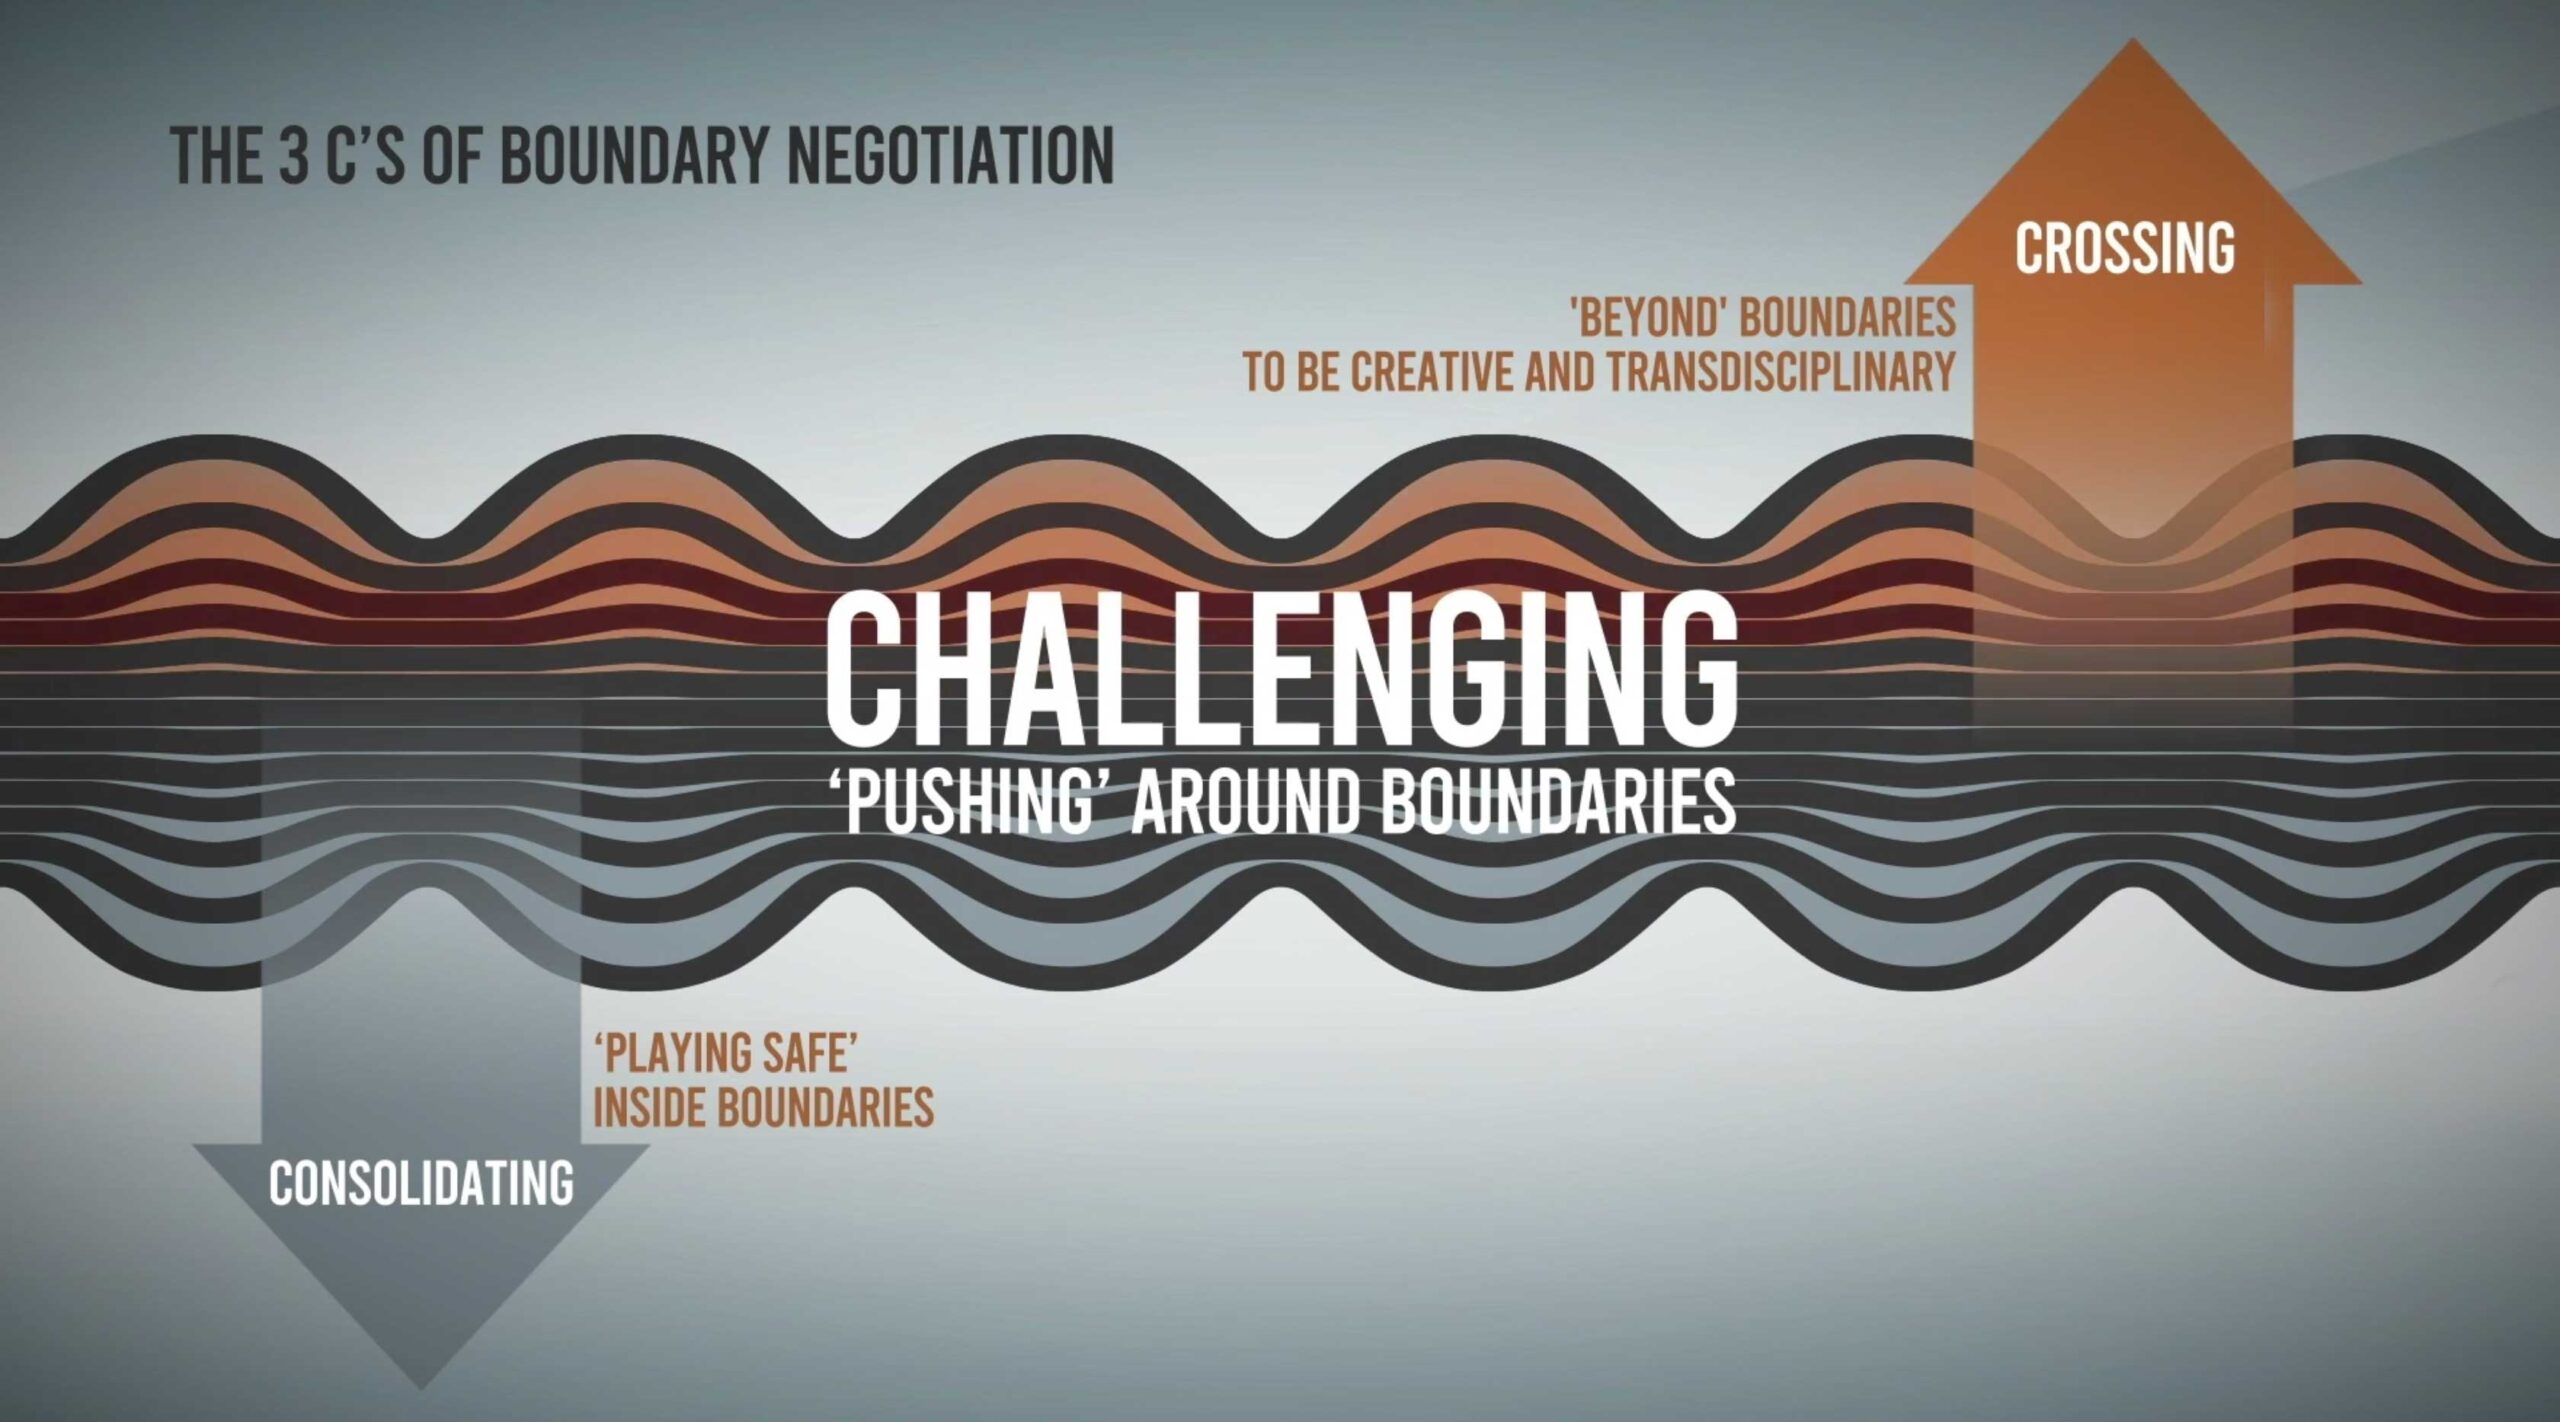 The 3 C's of boundary negotiation: Consolidating ('playing safe' inside boundaries) Challenging ('Pushing' around boundaries) Crossing ('beyond' boundaries to be creative and transdisciplinary)